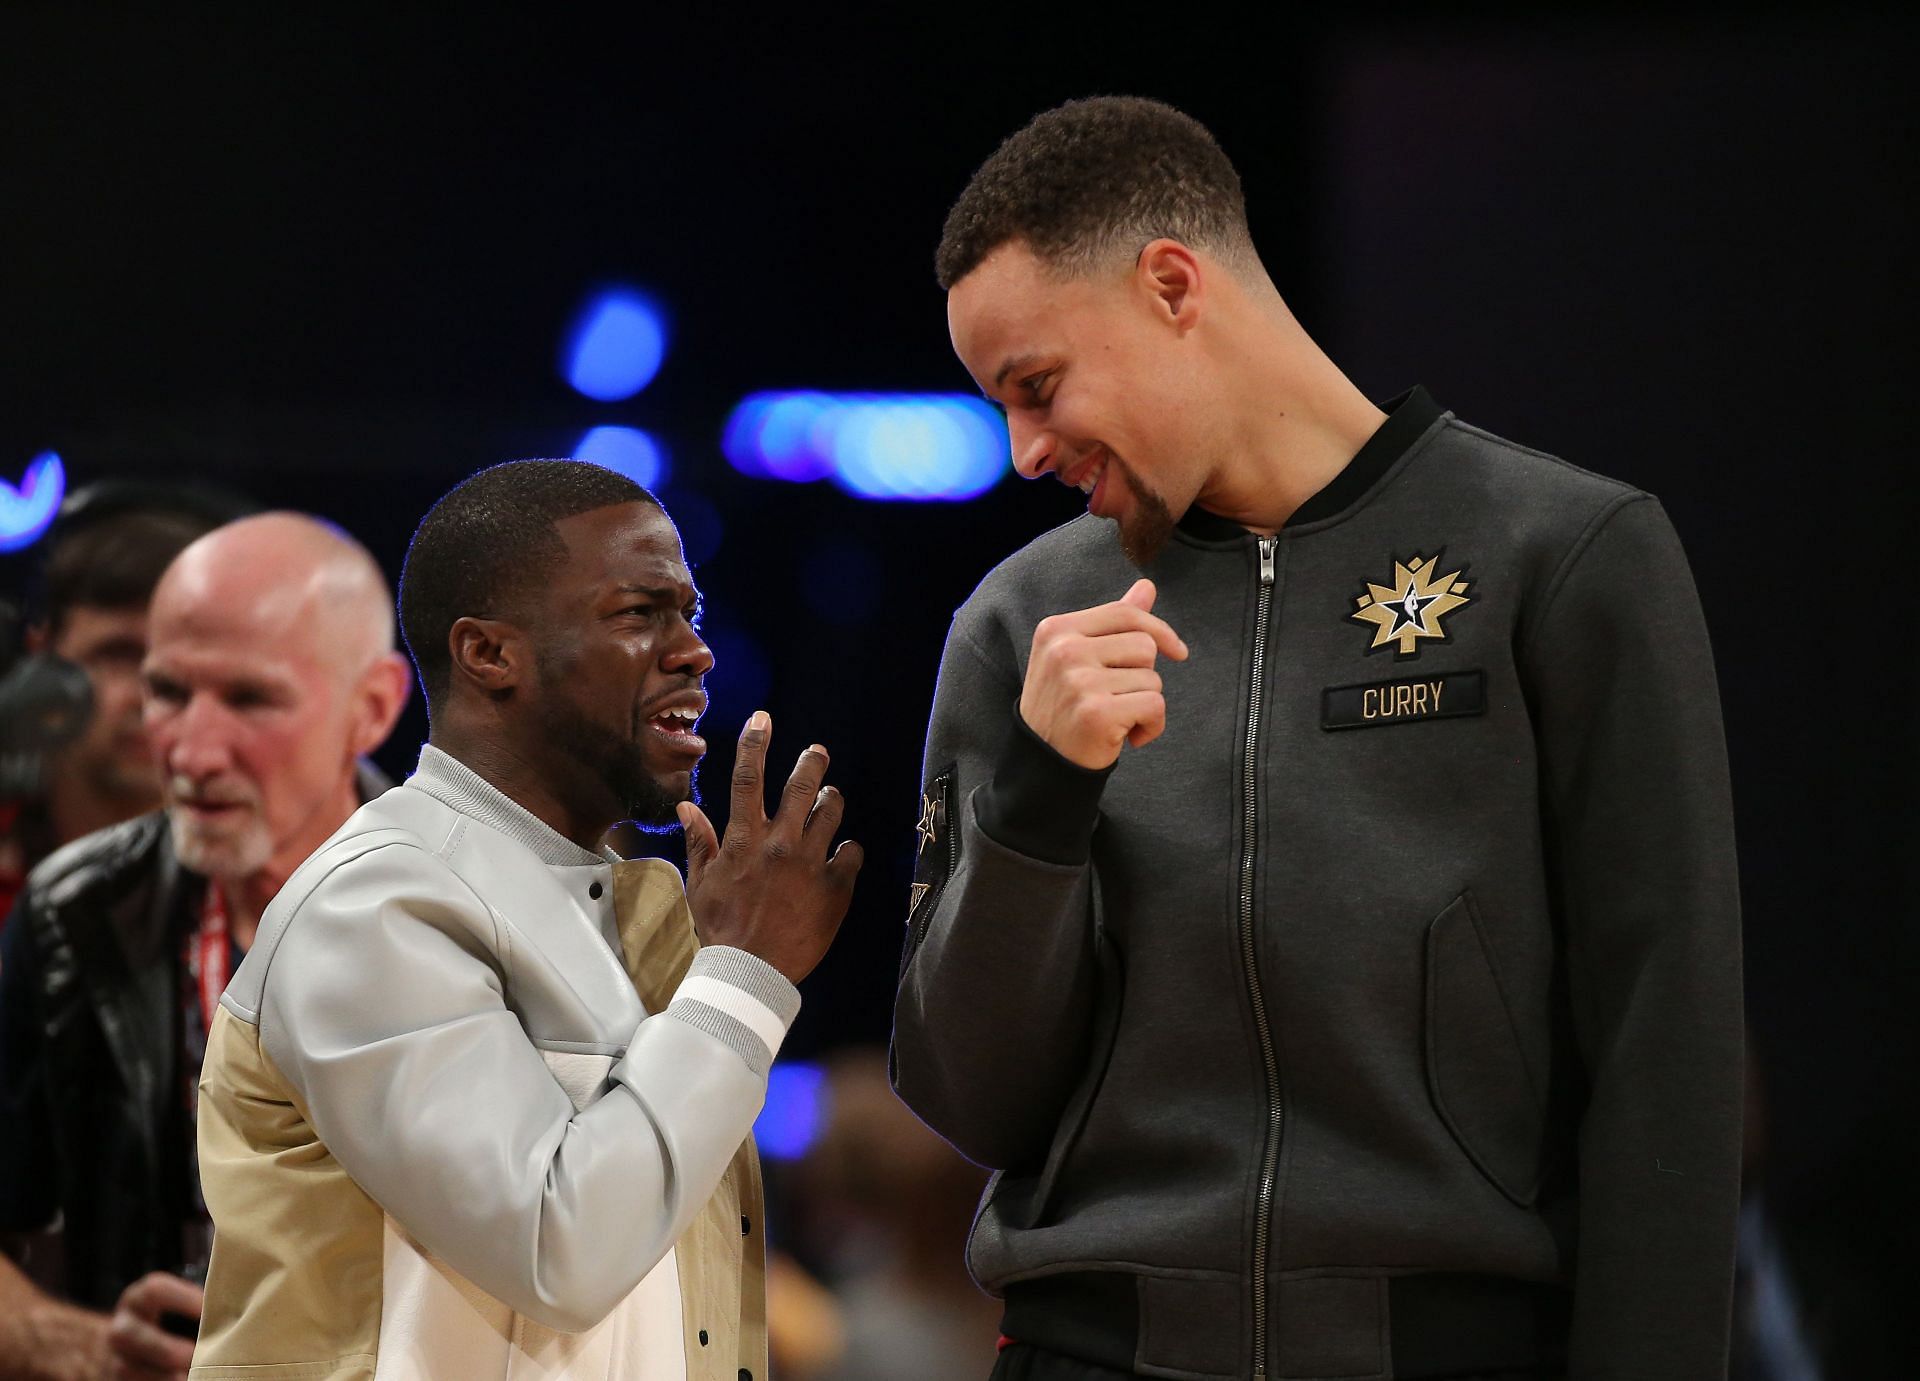 Why they give Kev the play school size ball” – Fans roast Kevin Hart for doing photshoot with Steph Curry